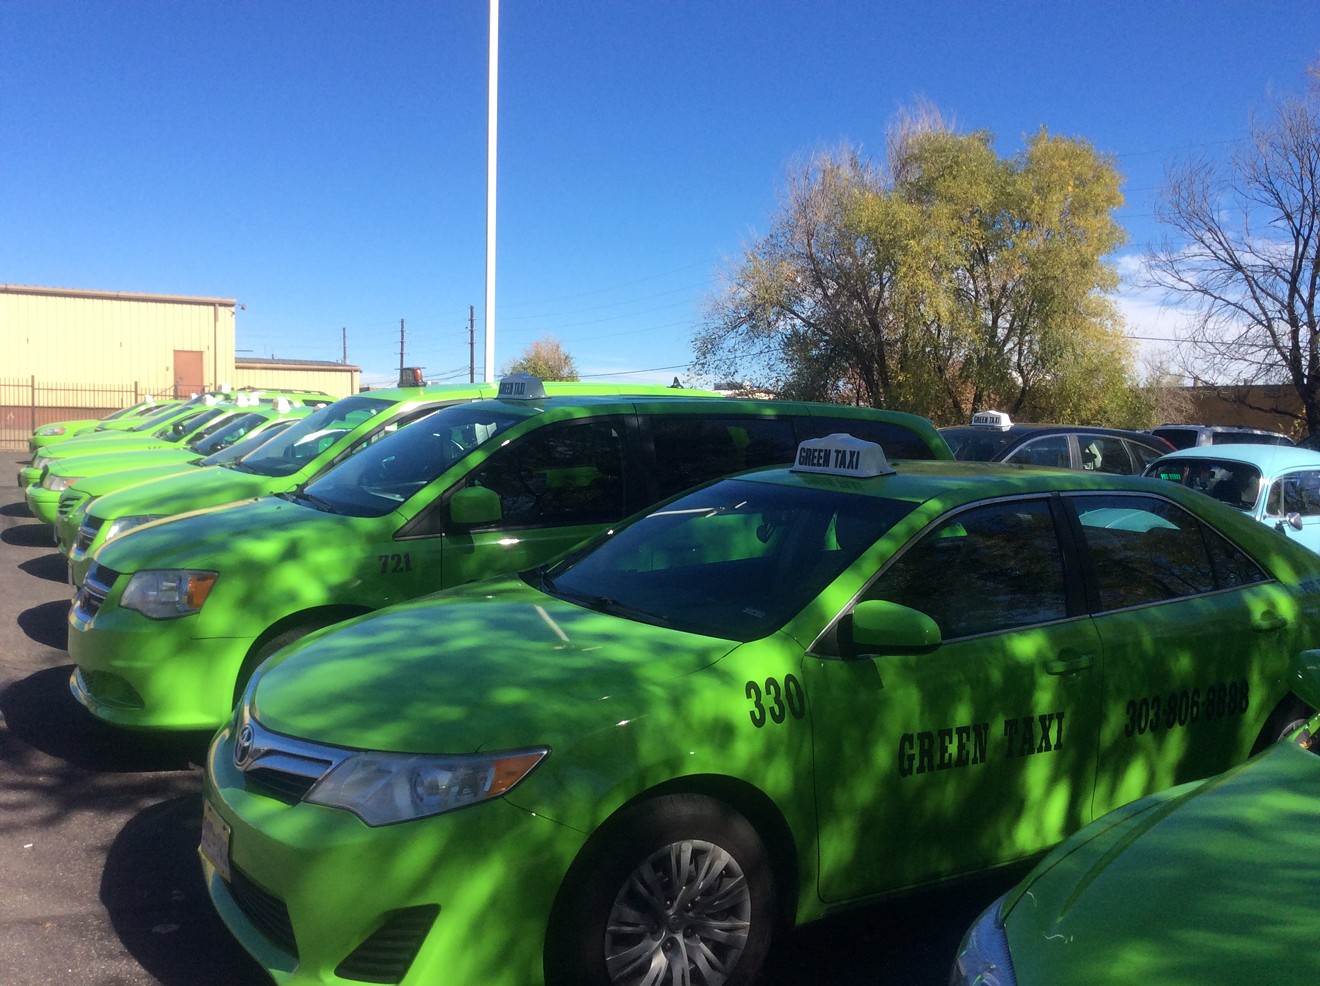 Green Taxi is one of  seven cab companies currently licensed to operate at DIA.